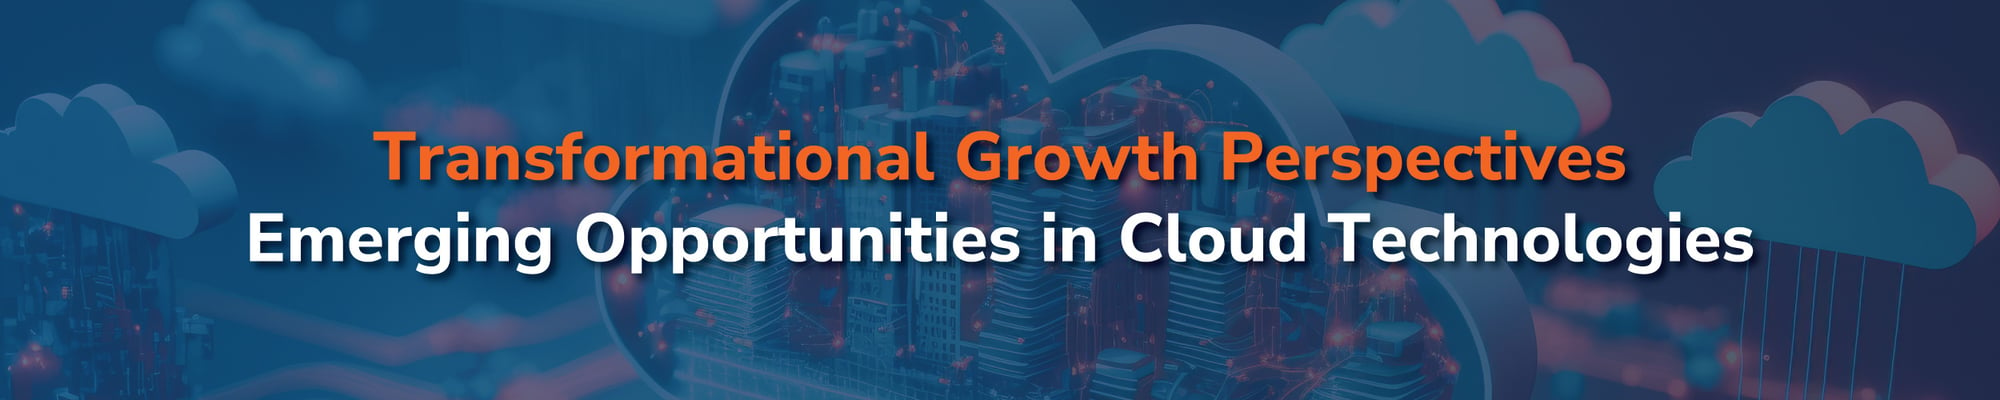 Transformational Growth Perspectives 	Emerging Opportunities in Cloud Technologies